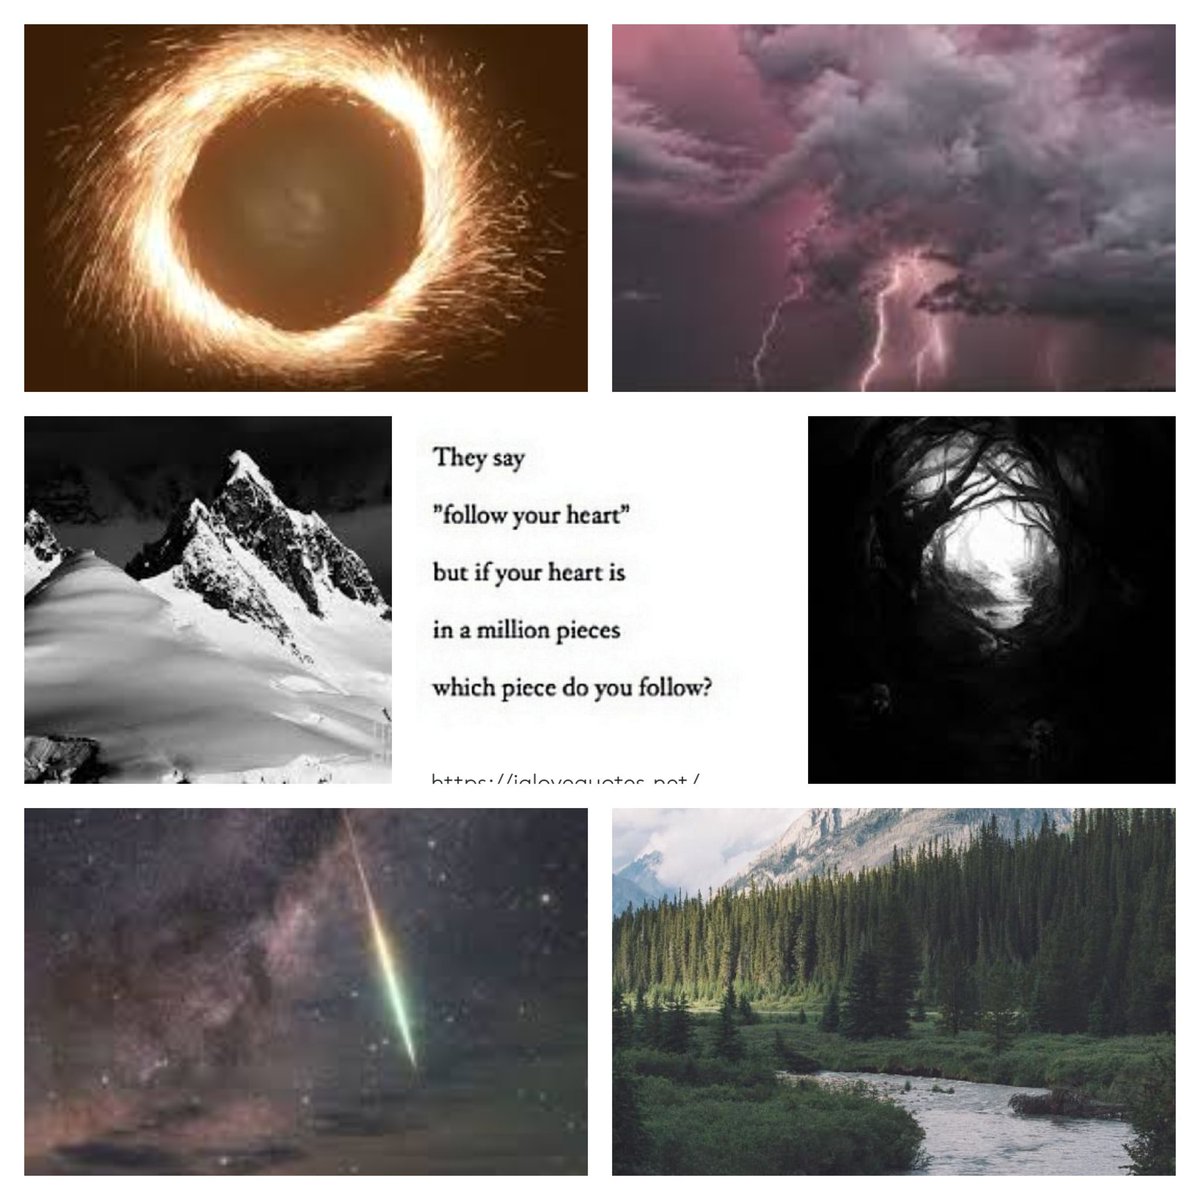 Ready for a *HUGE* surprise about my  #WIP? I'm *SO* excited to share it with you all!  The amazing & talented @AshJackNation has crafted a gorgeous  #aesthetic to visually capture the spirit of my story. Please take a look & let me know your reactions! #WritingCommunity